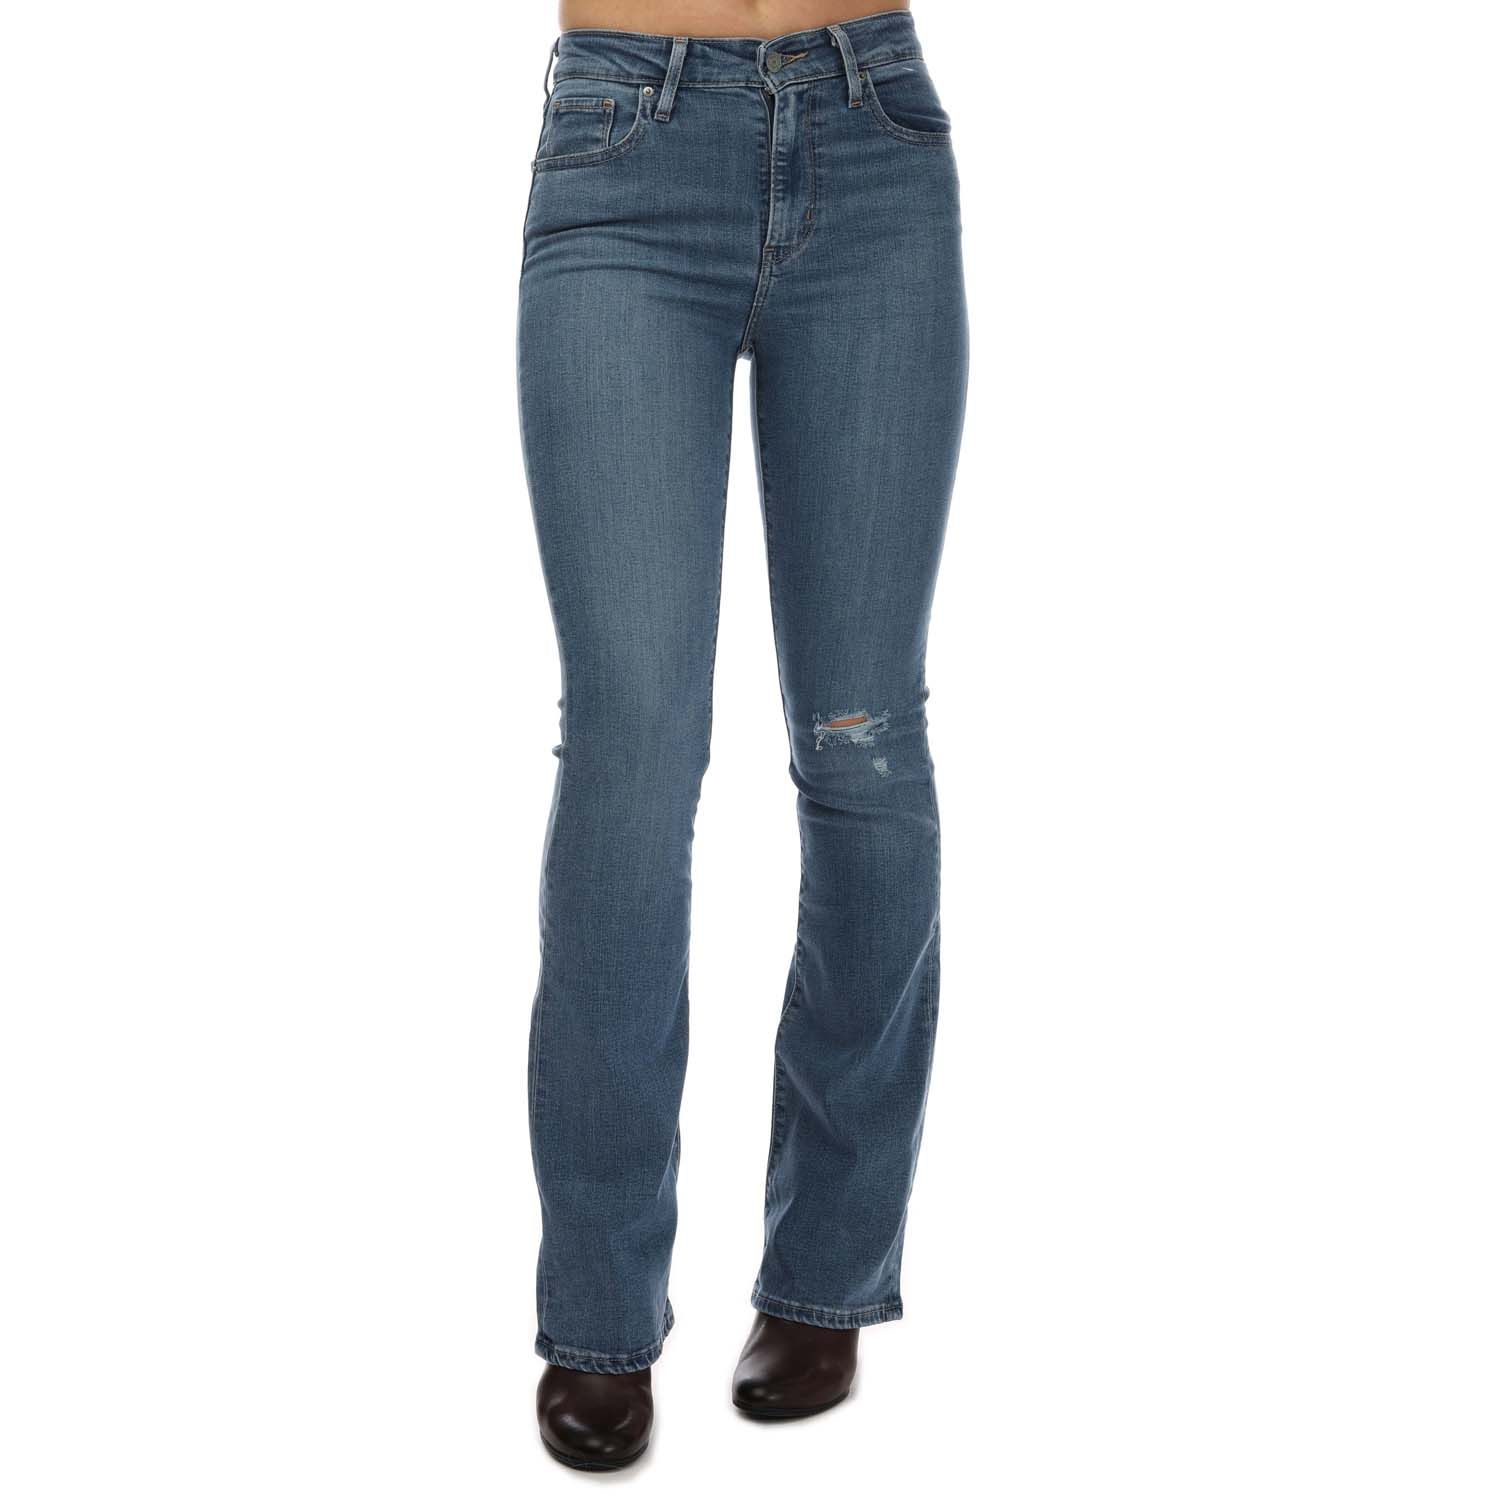  Levis Womens 725 High Rise Bootcut Jeans